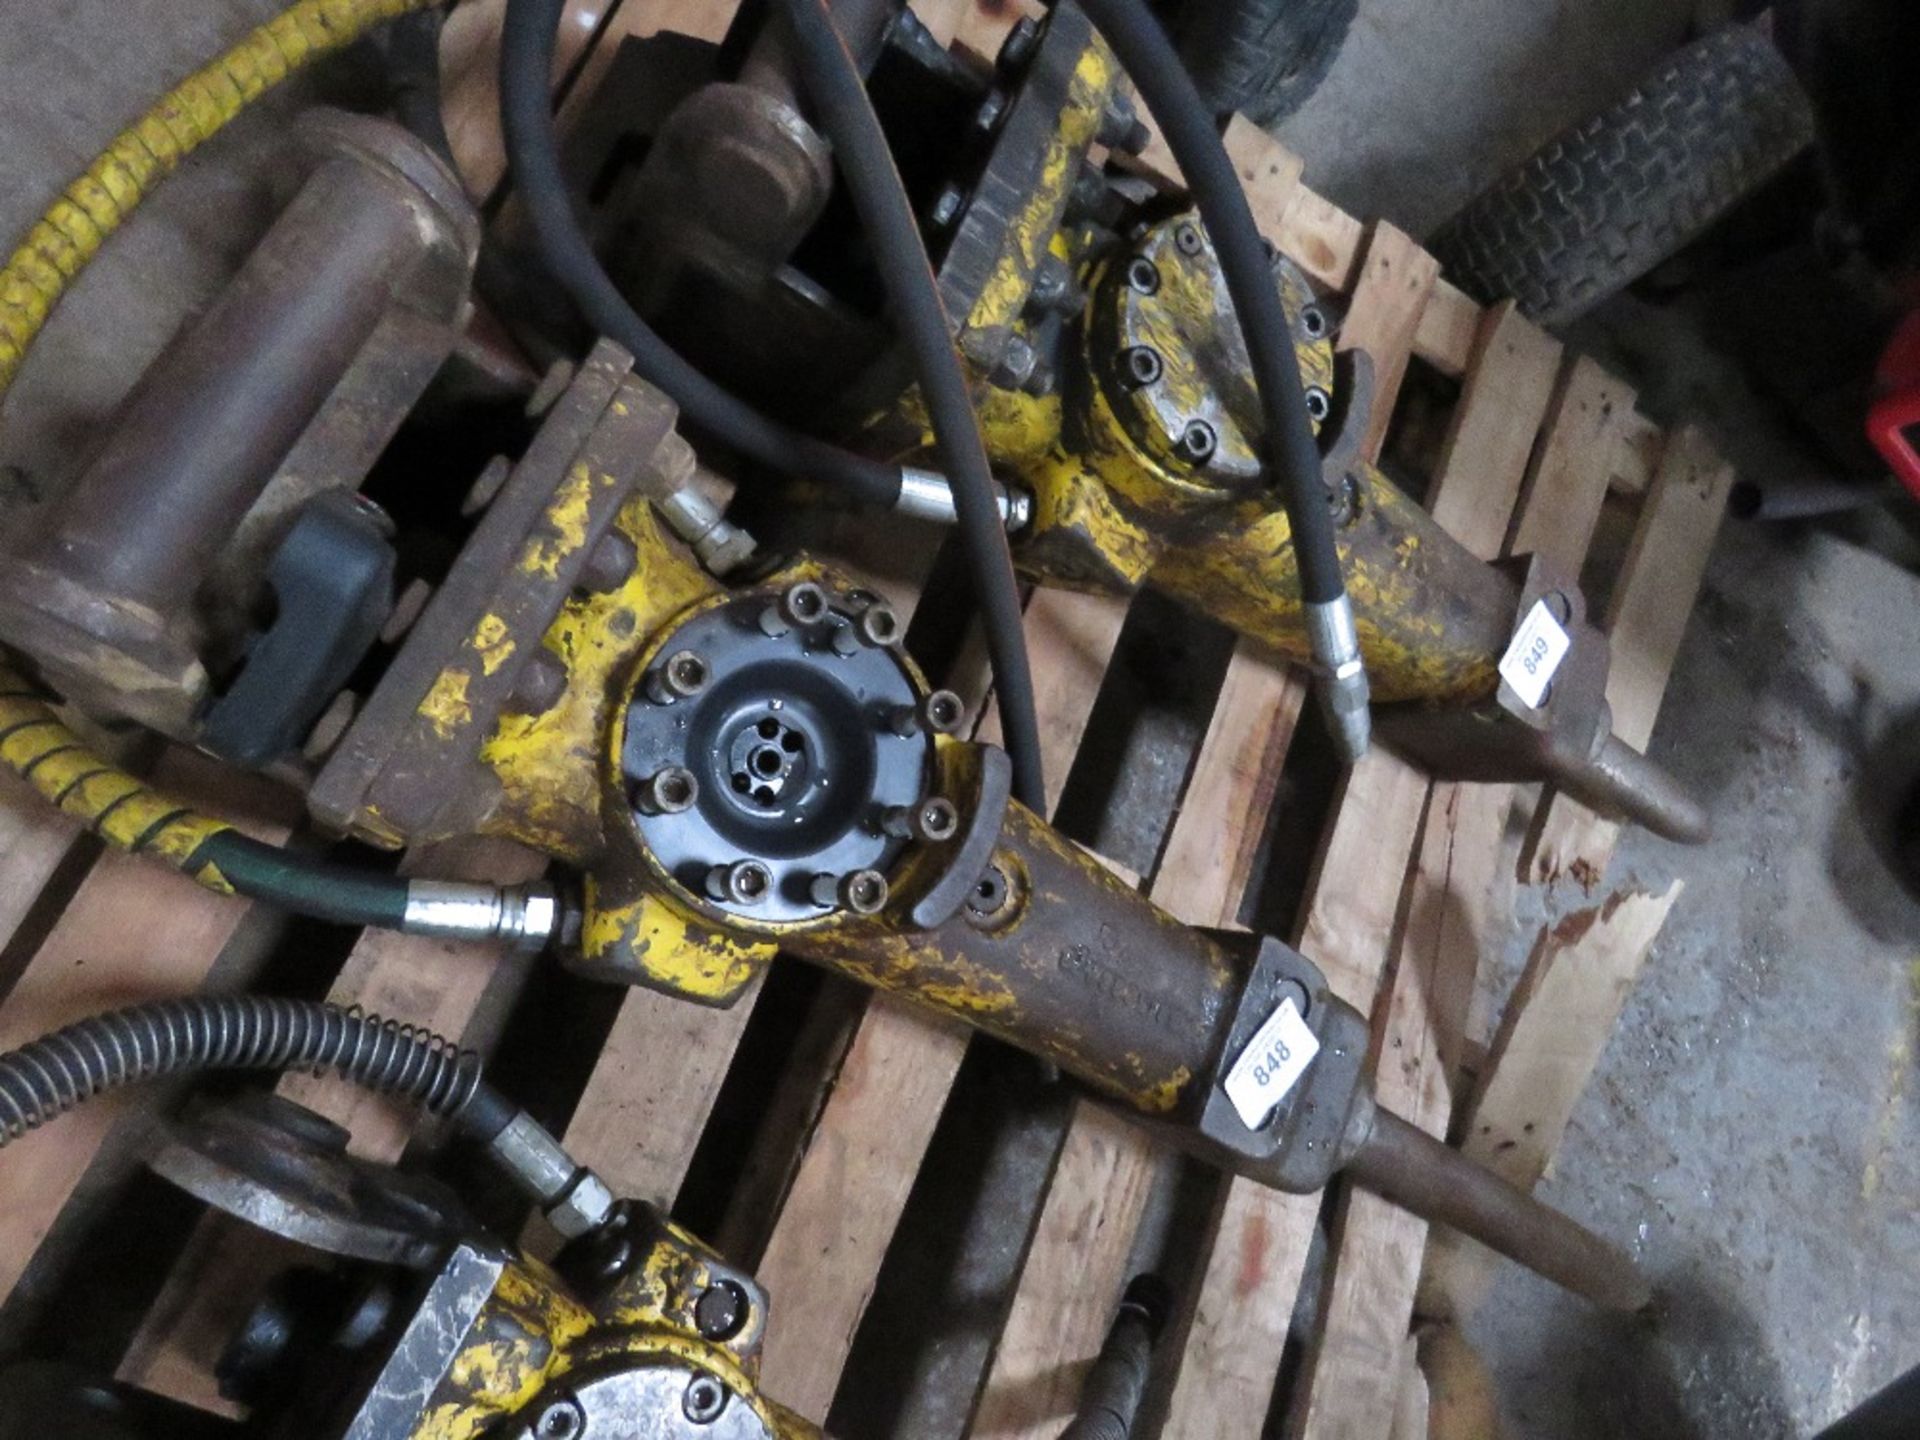 ATLAS COPCO BREAKER FOR 1.5-3 TONNE EXCAVATOR...PARTS MISSING AS SHOWN - Image 2 of 4